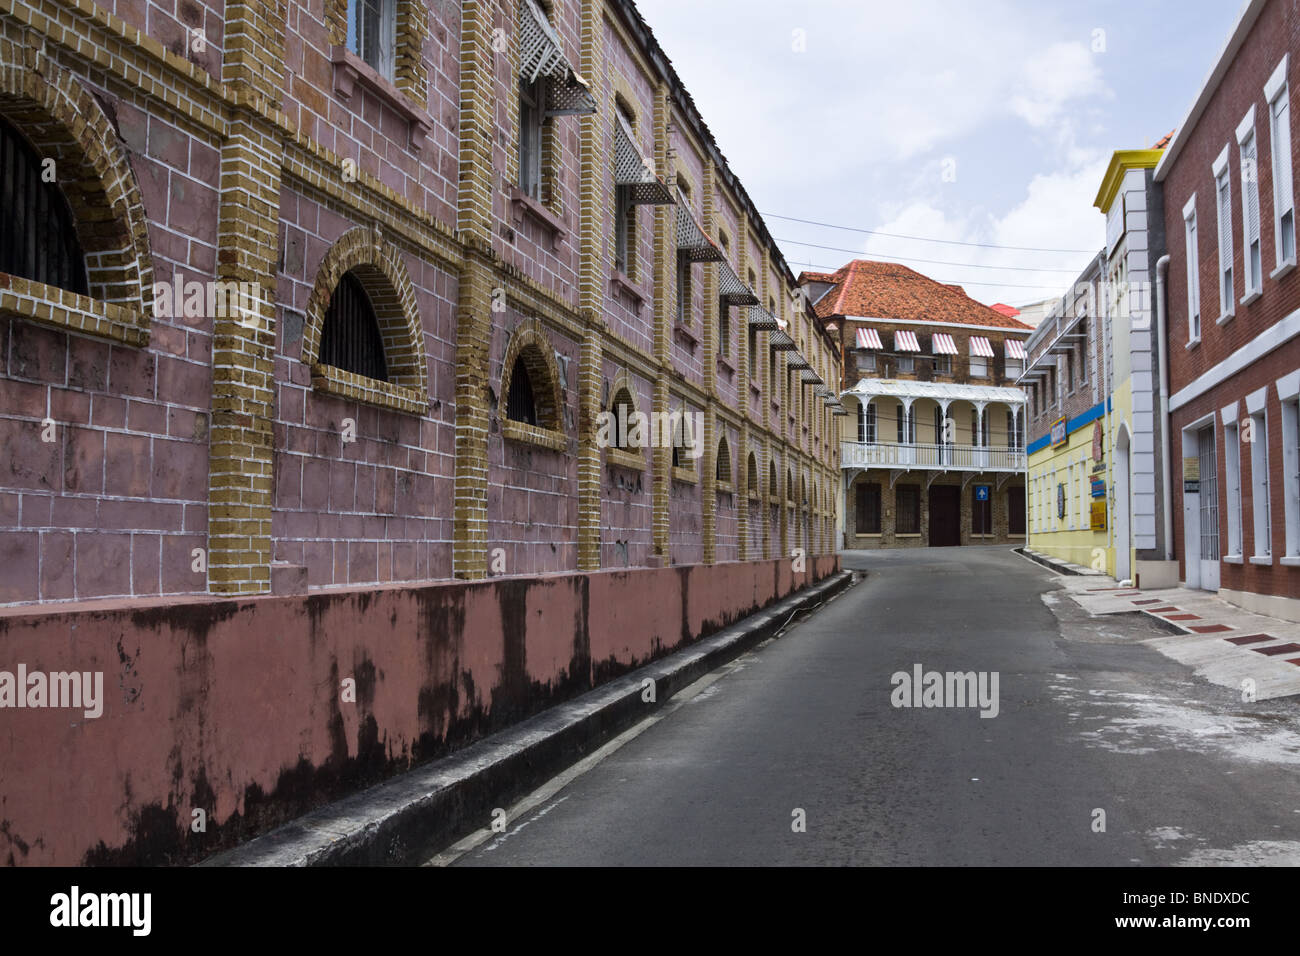 Old colonial stone buildings on a street in St George's, Grenada, West Indies, Caribbean Sea Stock Photo